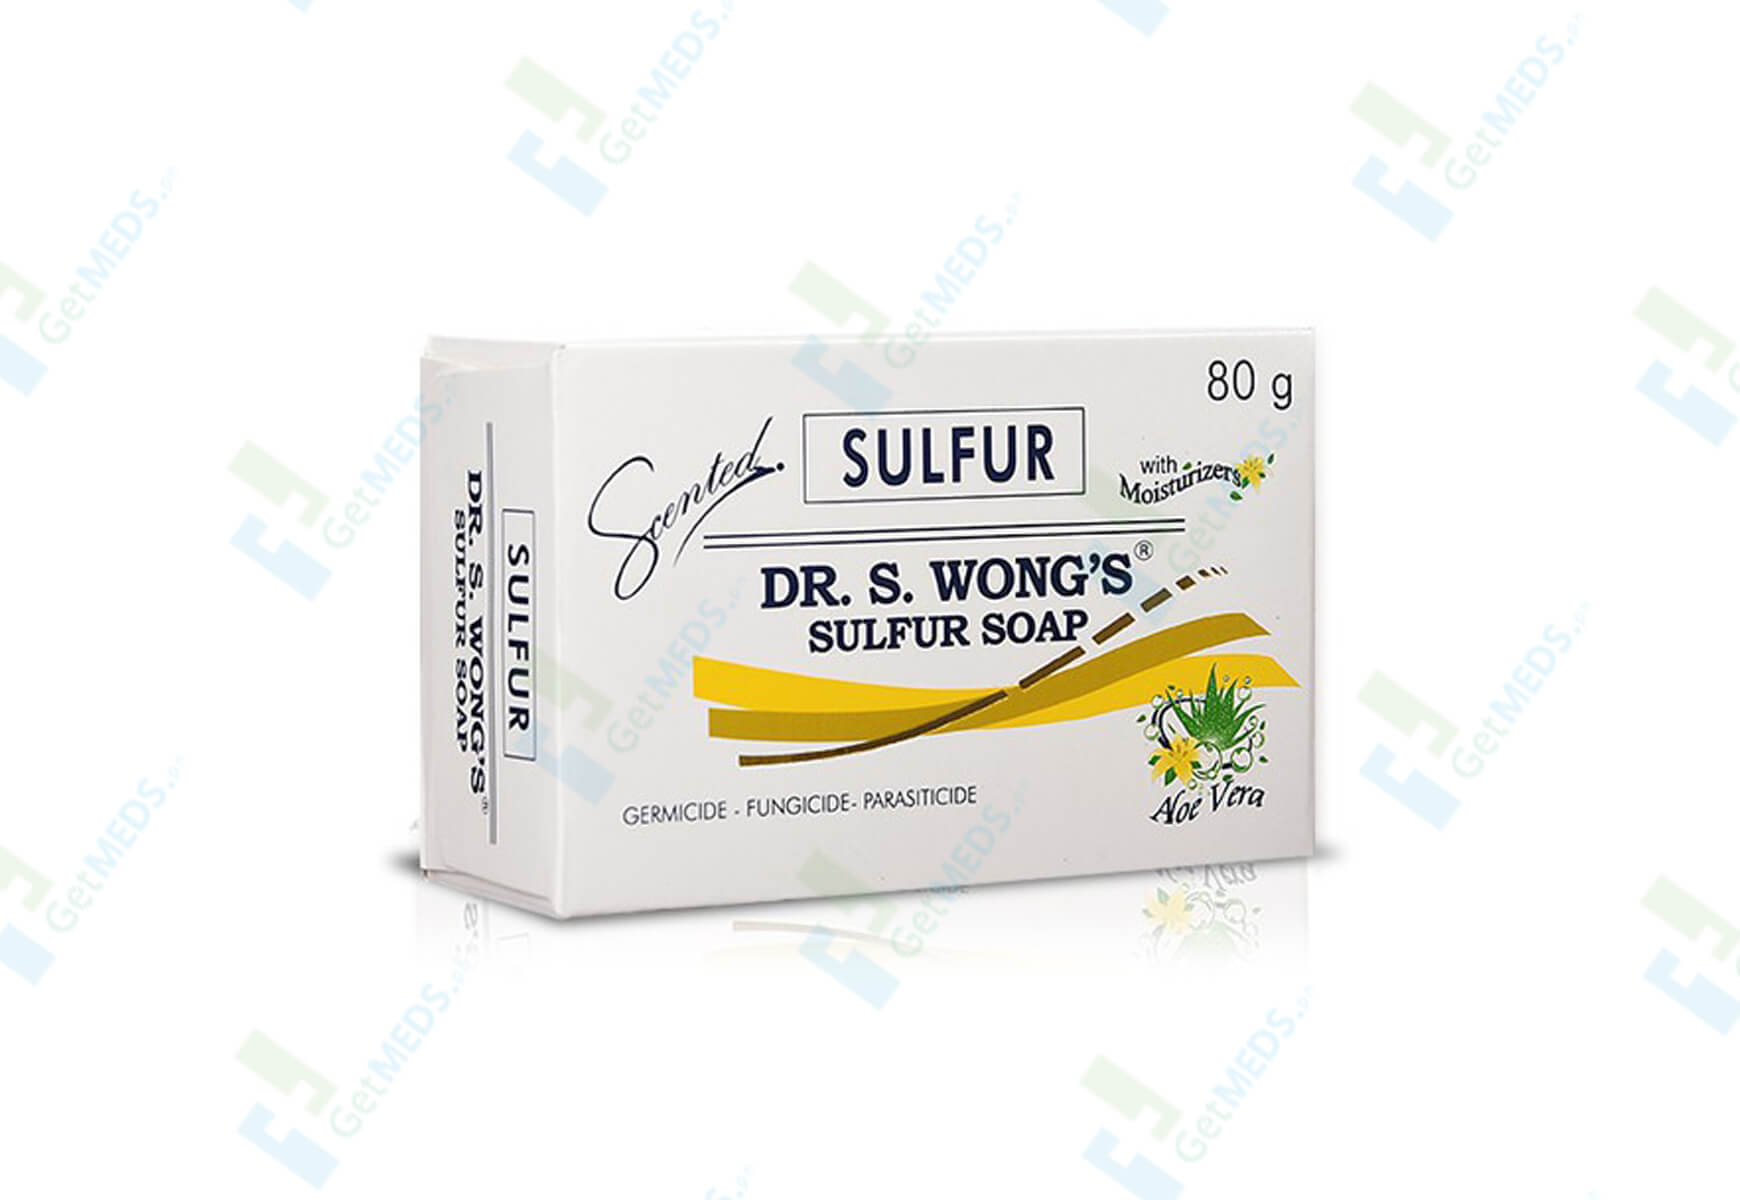 Dr. S. Wong's Sulfur Soap with Moisturizer